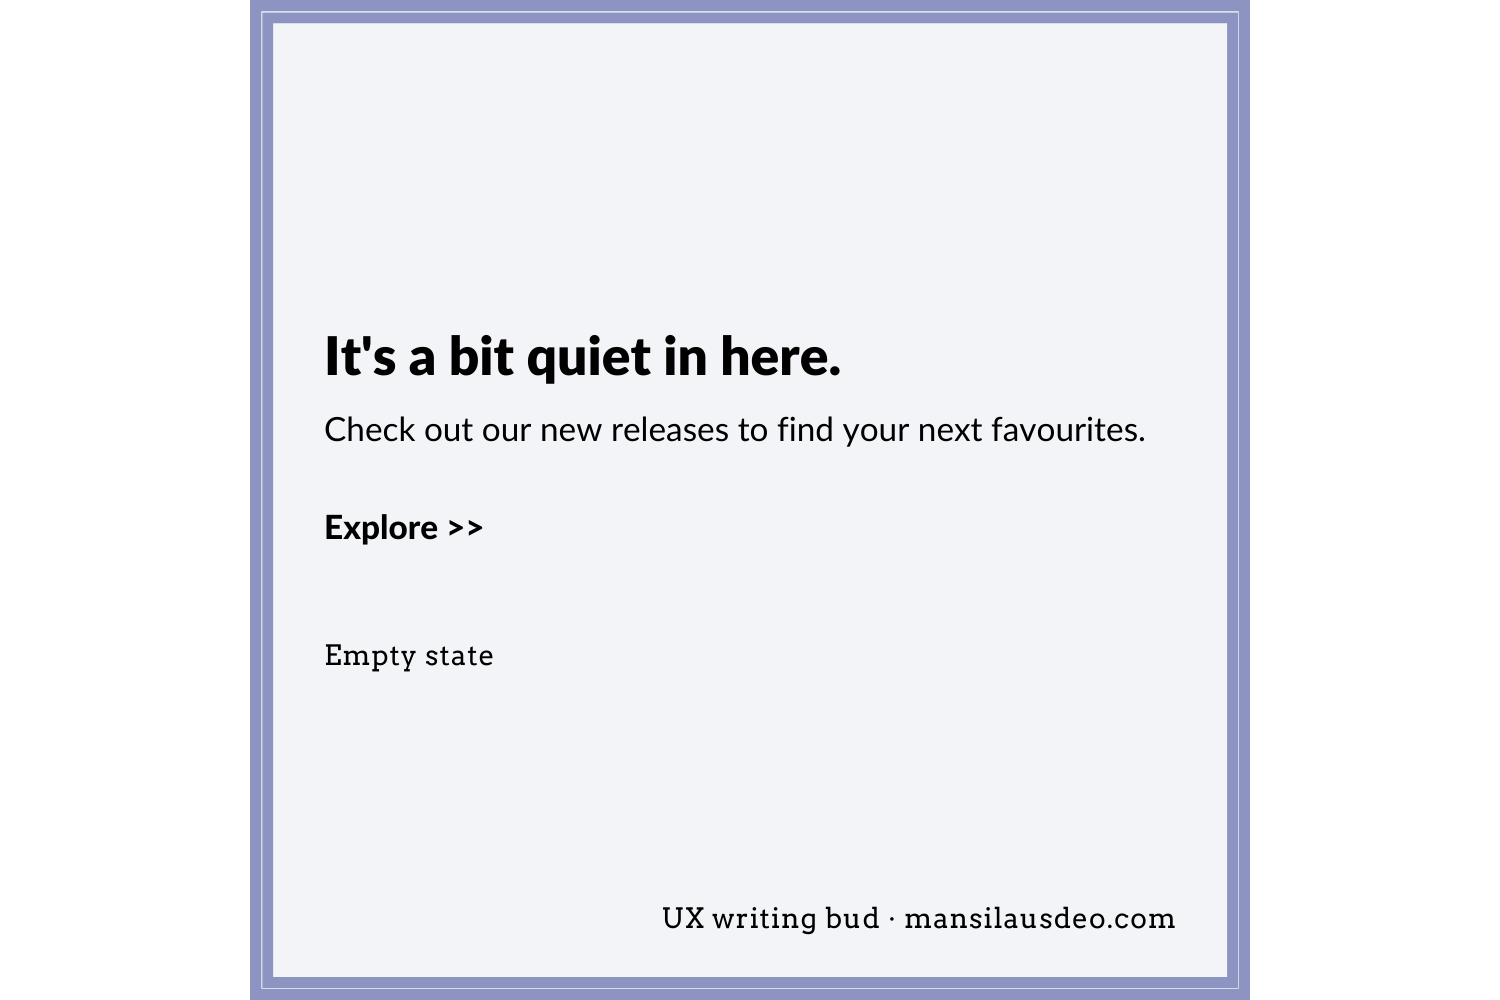 It's a bit quiet in here. Check out our new releases to find your next favourites. Explore >> empty state UX Writing Bud